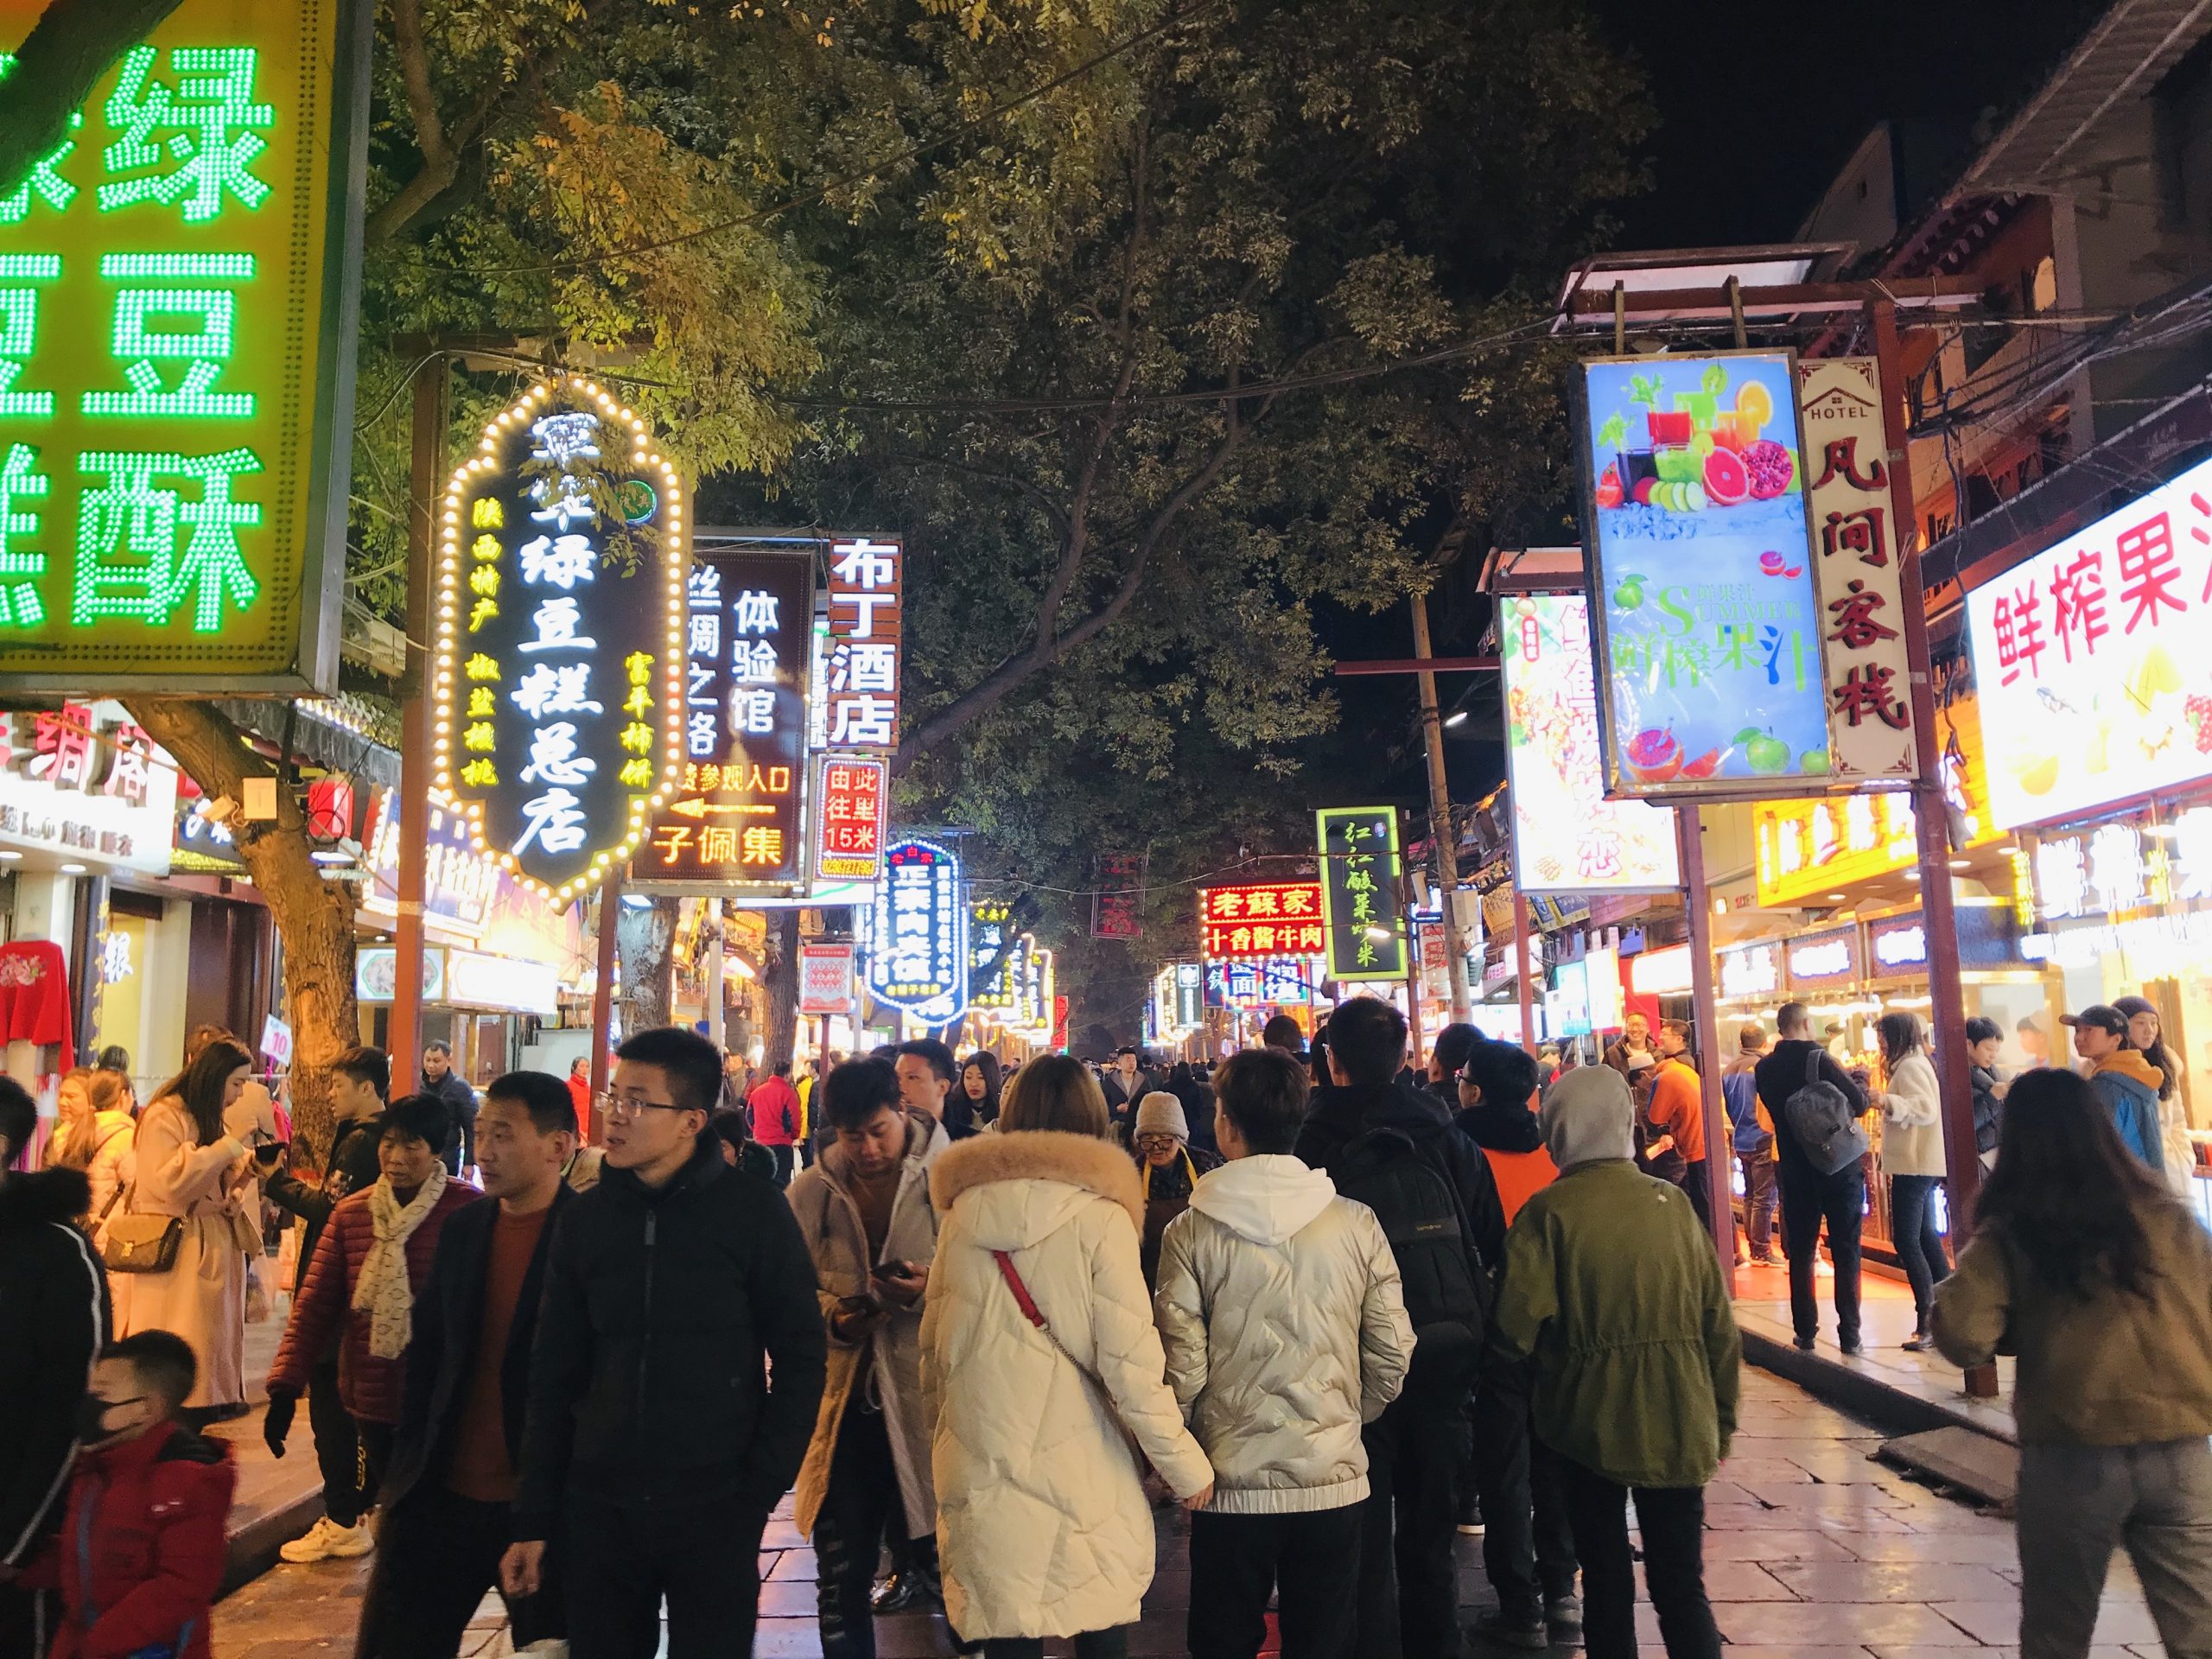 Muslims and sex in Chengdu